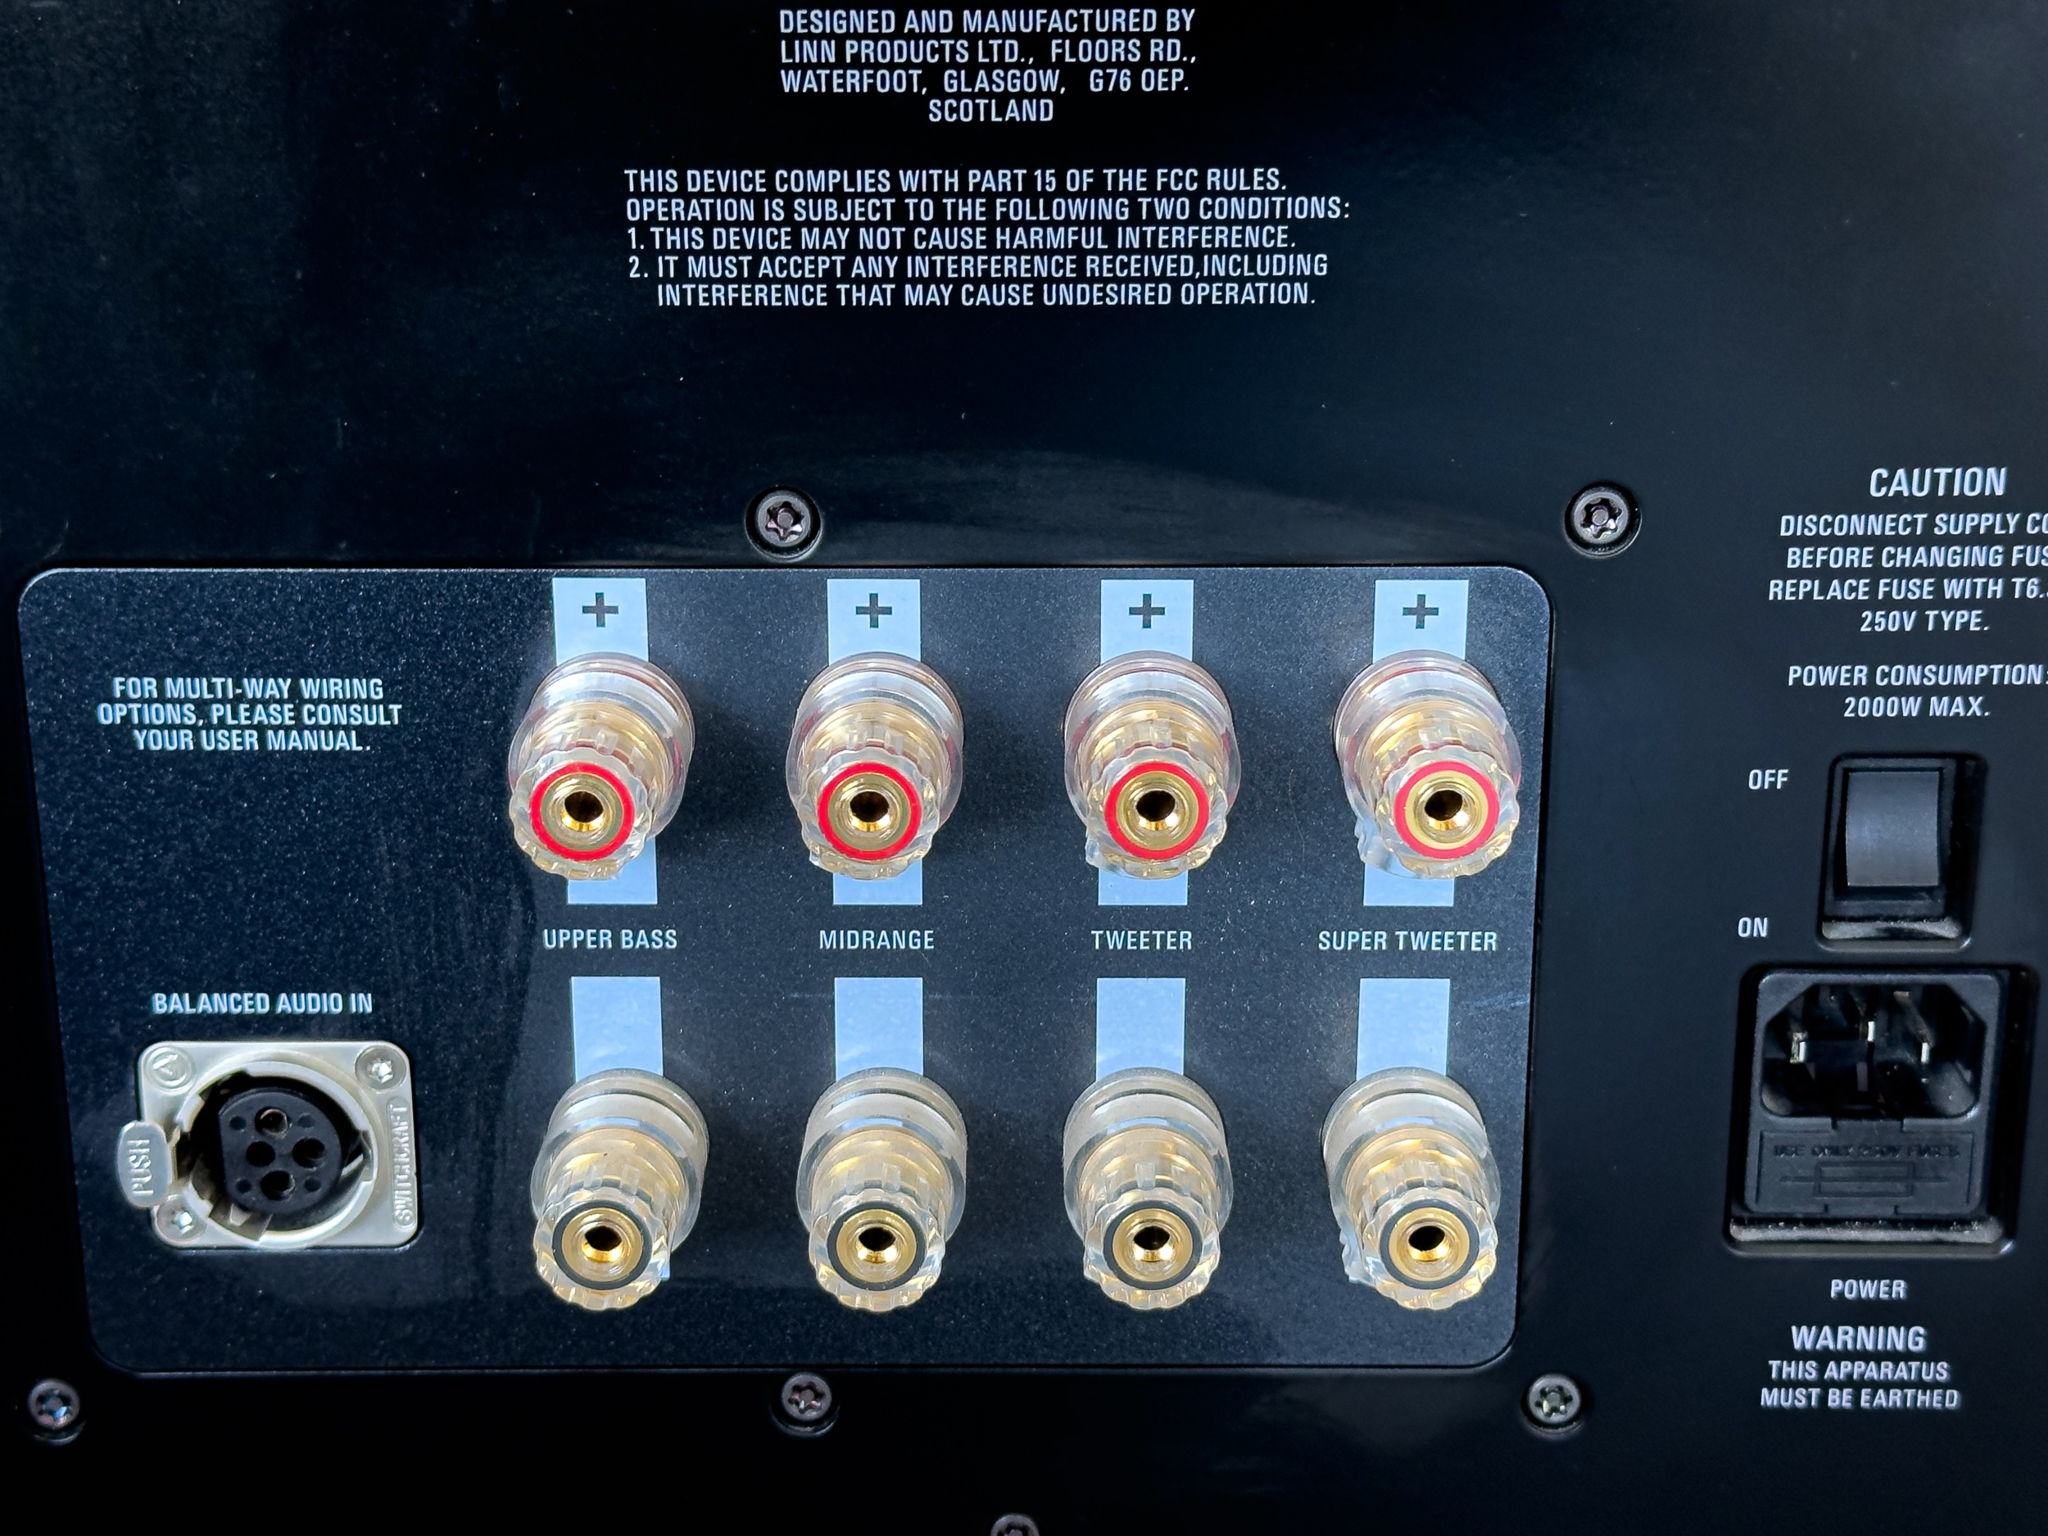 Here is a clearer view of the connection panel.